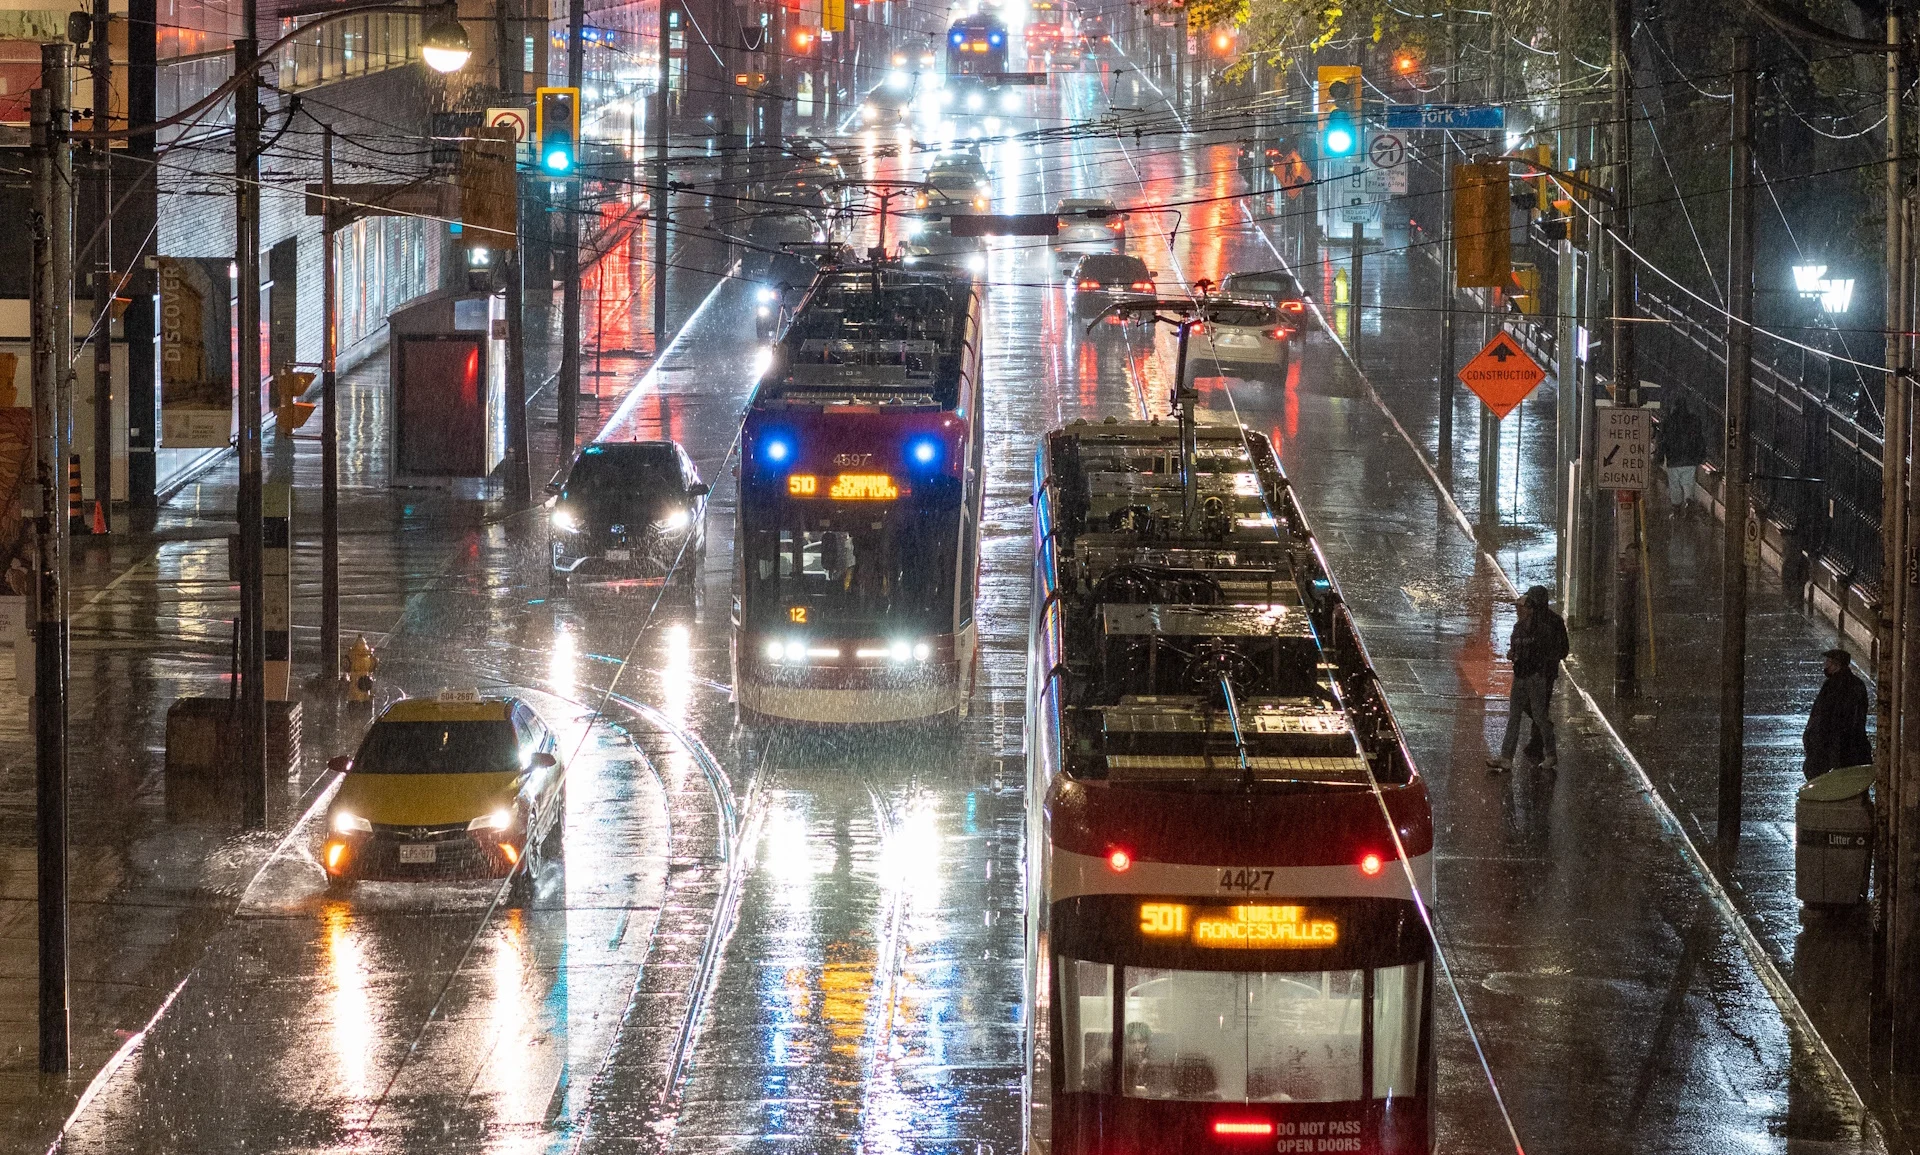 Rain-stricken Ontario will see more wet weather as soggy April presses on